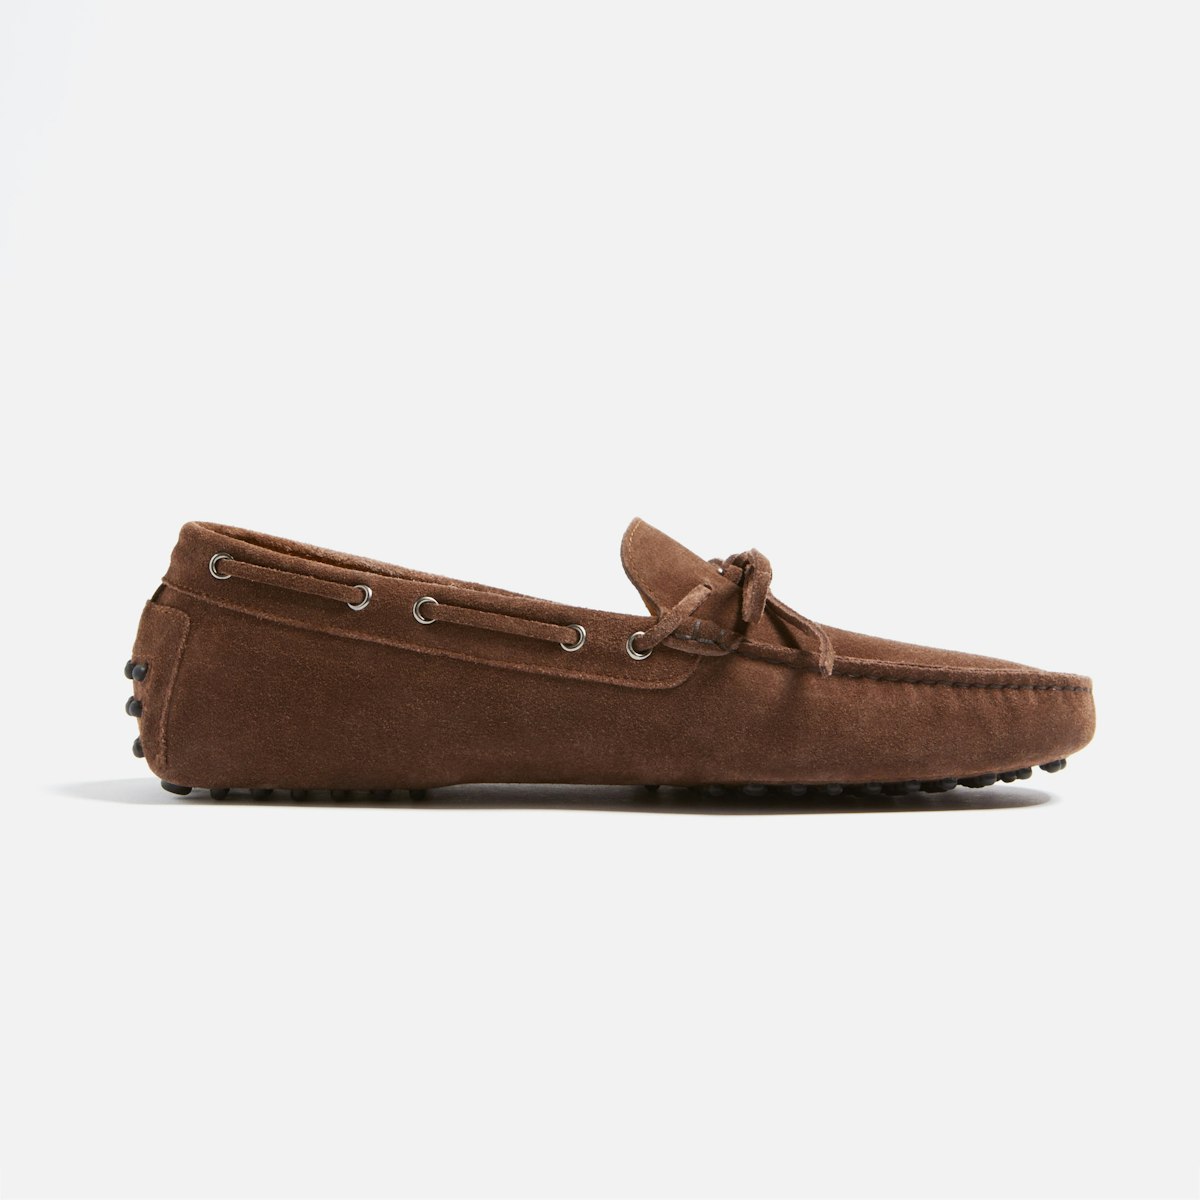 Lucca_LaceUp_DrivingShoe_Chocolate_1x1_RIGHT_0334.jpg